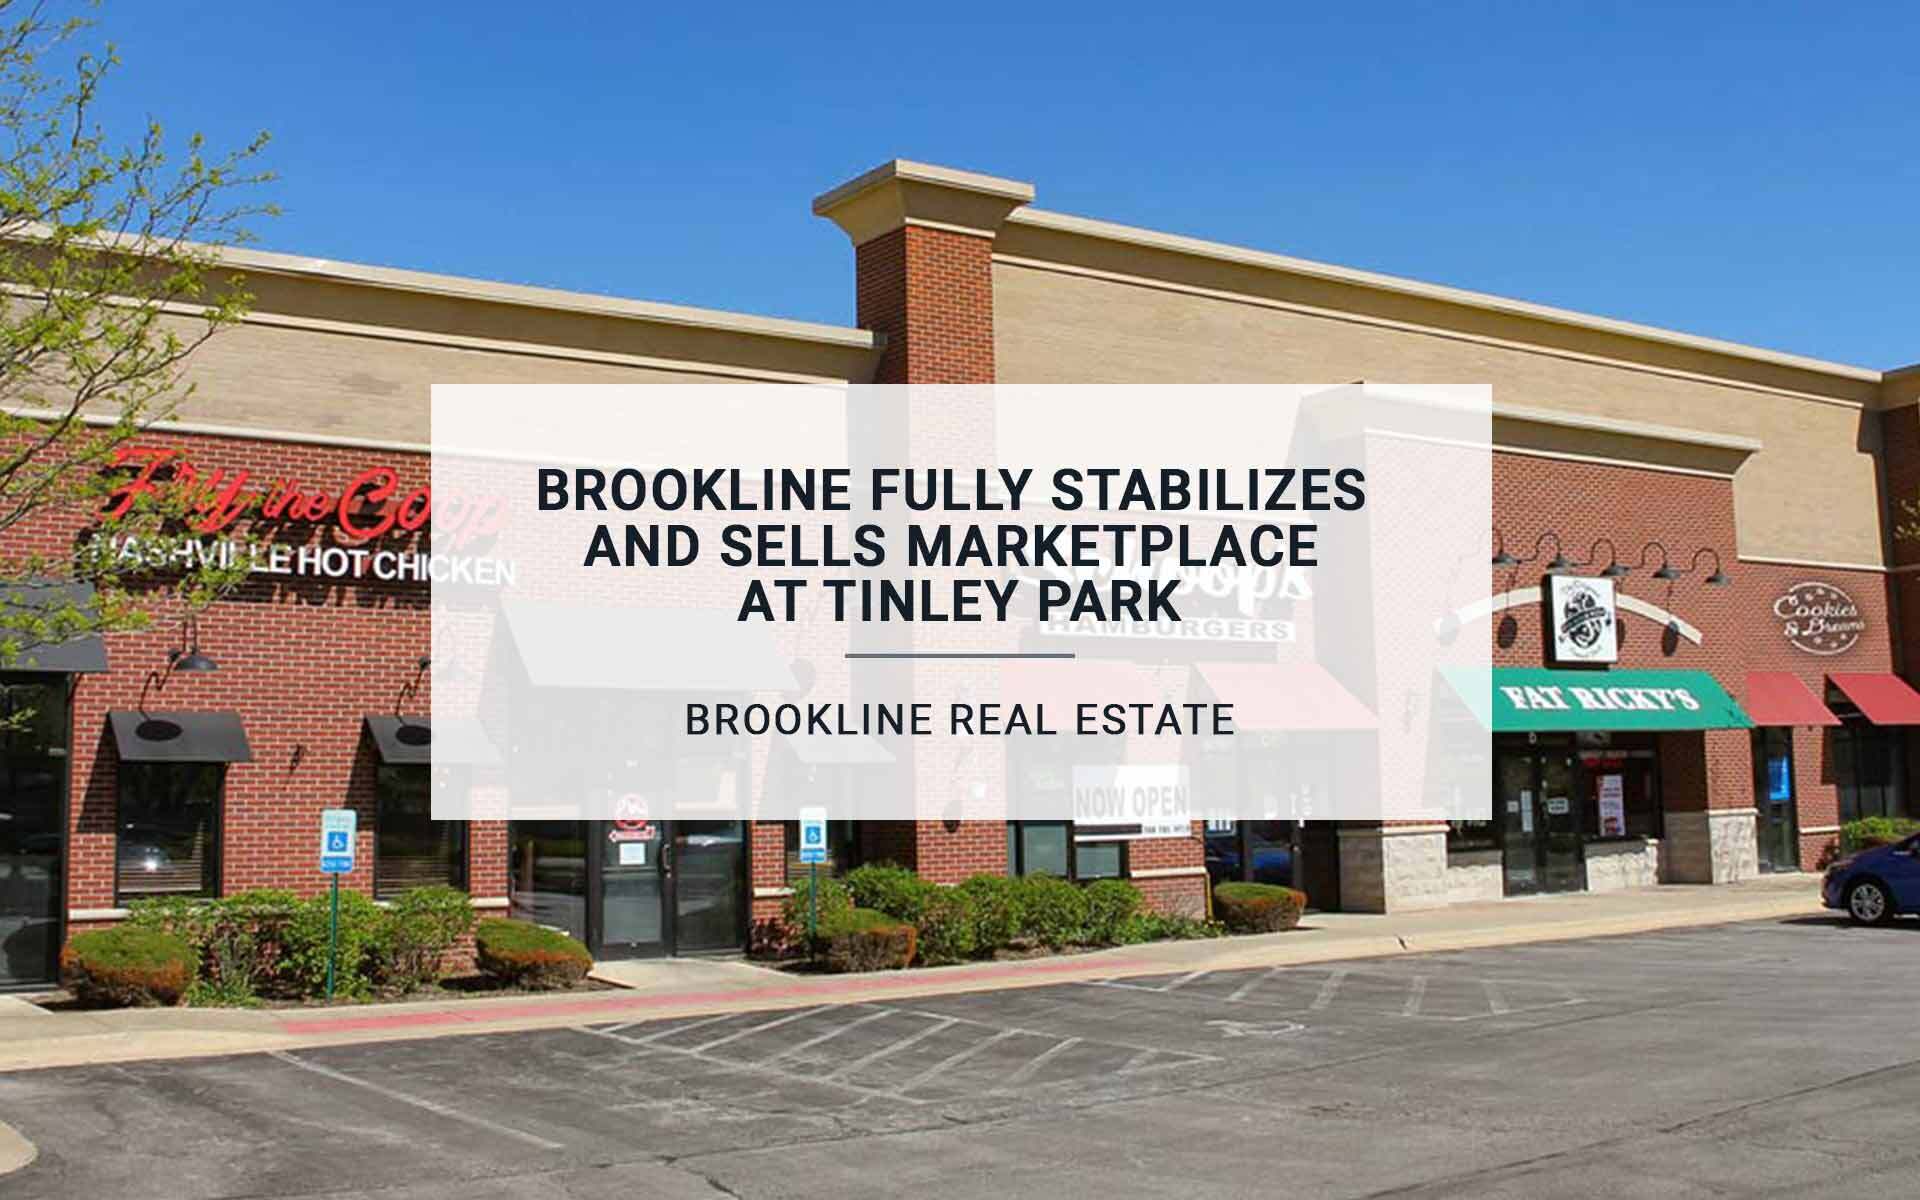 Brookline Fully Stabilizes And Sells Marketplace at Tinley Park